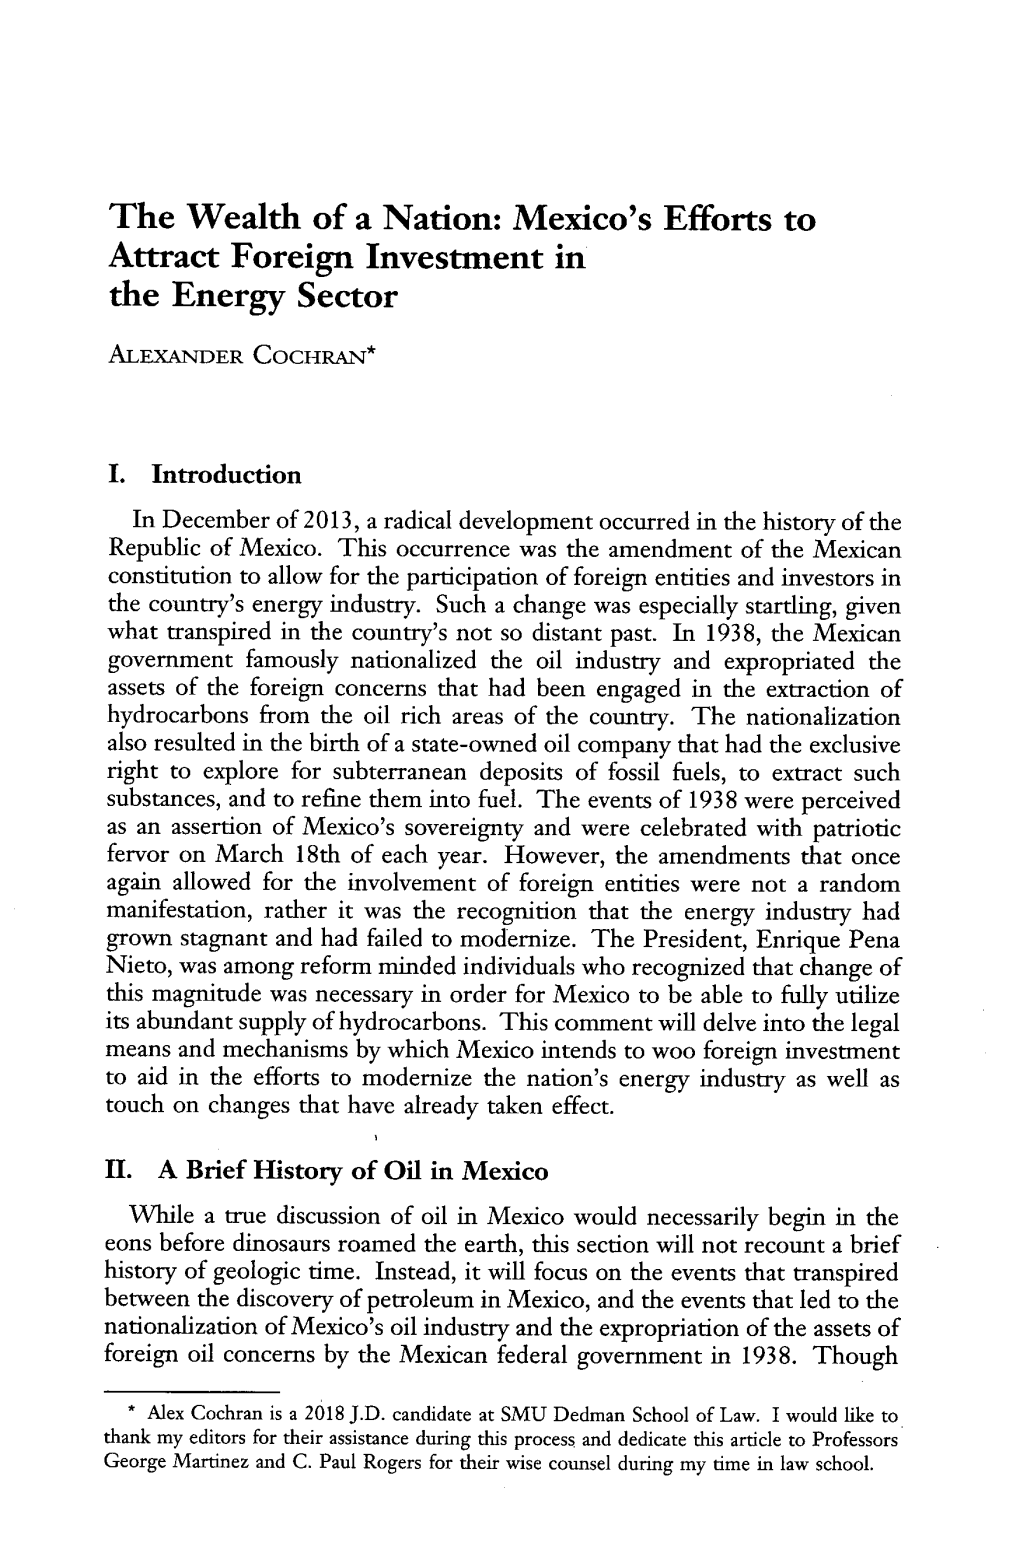 Mexico's Efforts to Attract Foreign Investment in the Energy Sector